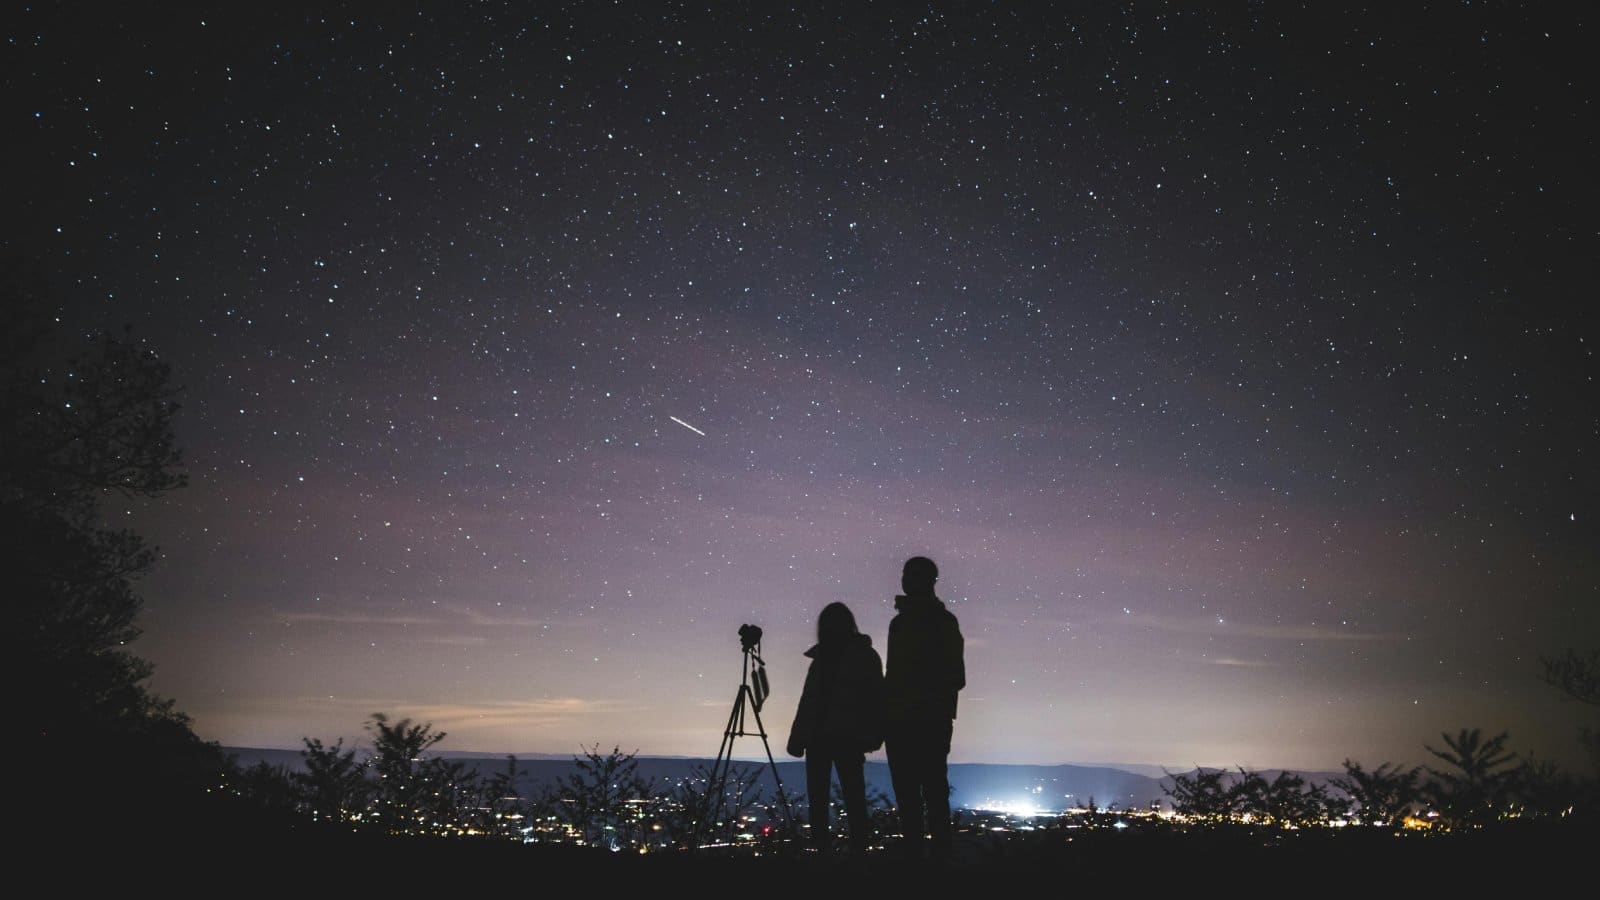 Image Credit: Pexels / Yuting Gao <p>The knowledge of navigating by the stars is a sophisticated practice that can teach us about astronomy and the natural world, offering a deeper connection to the universe.</p>